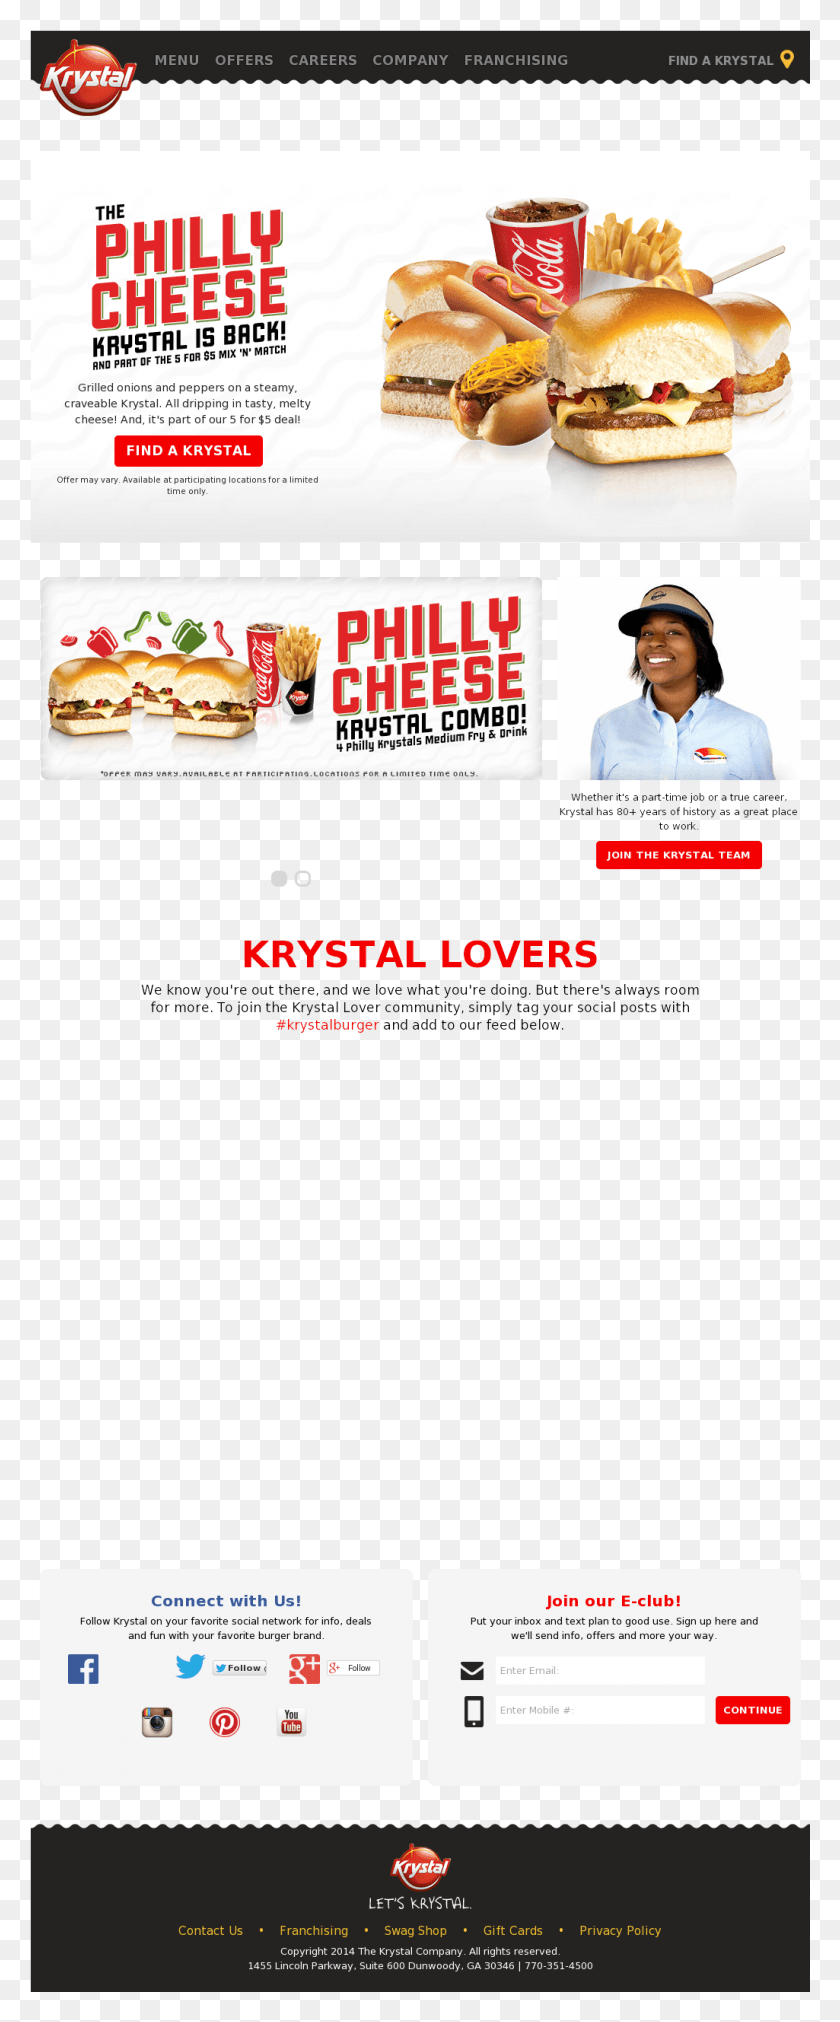 1025x2579 The Krystal Company Competitors Revenue And Employees Online Advertising, Person, Human, Flyer Descargar Hd Png